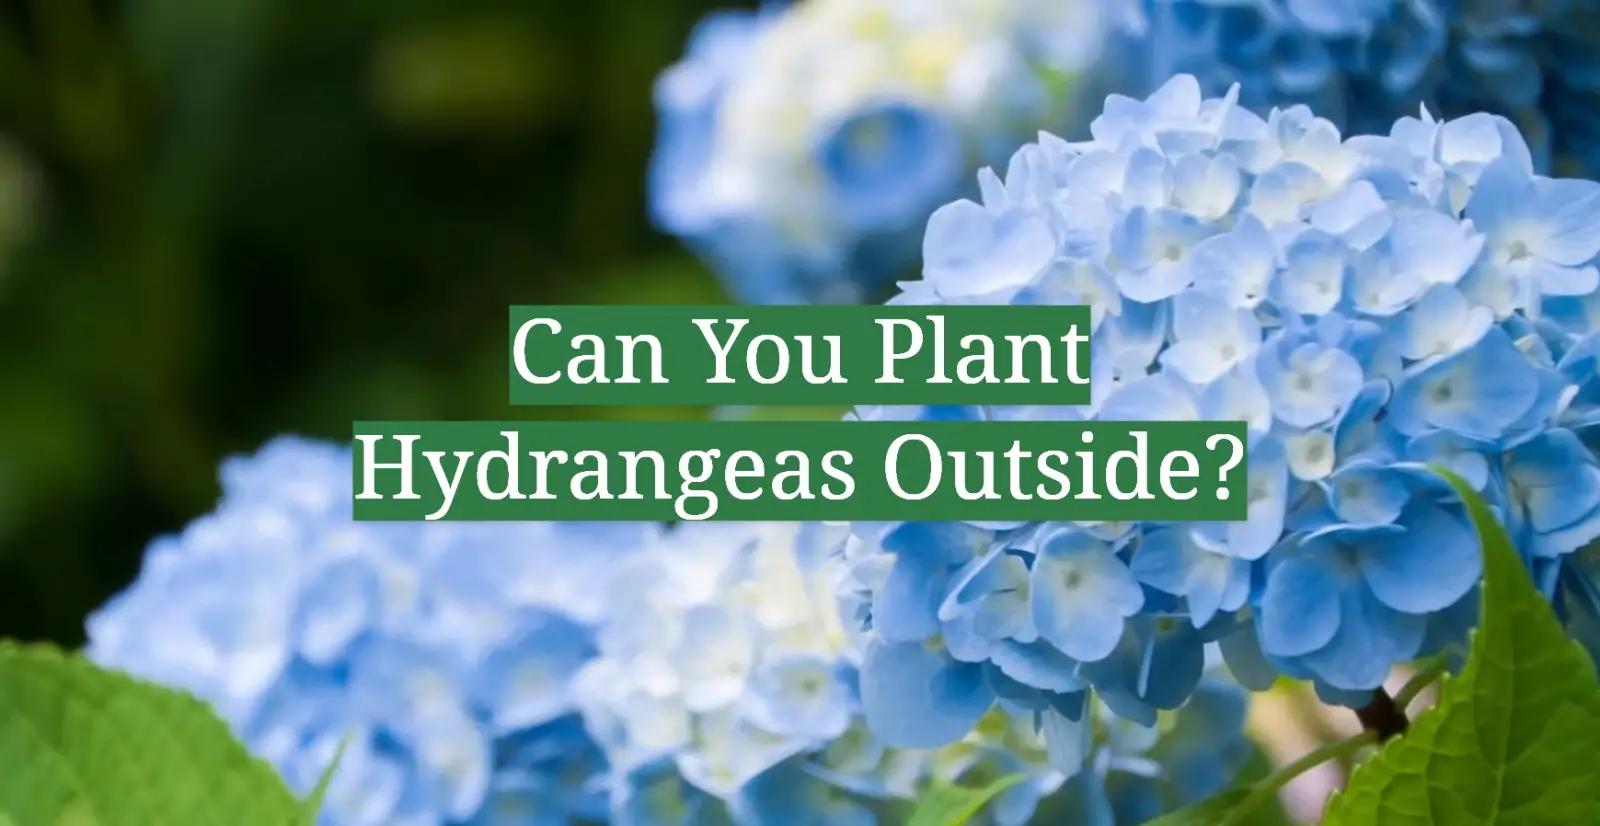 Can You Plant Hydrangeas Outside?